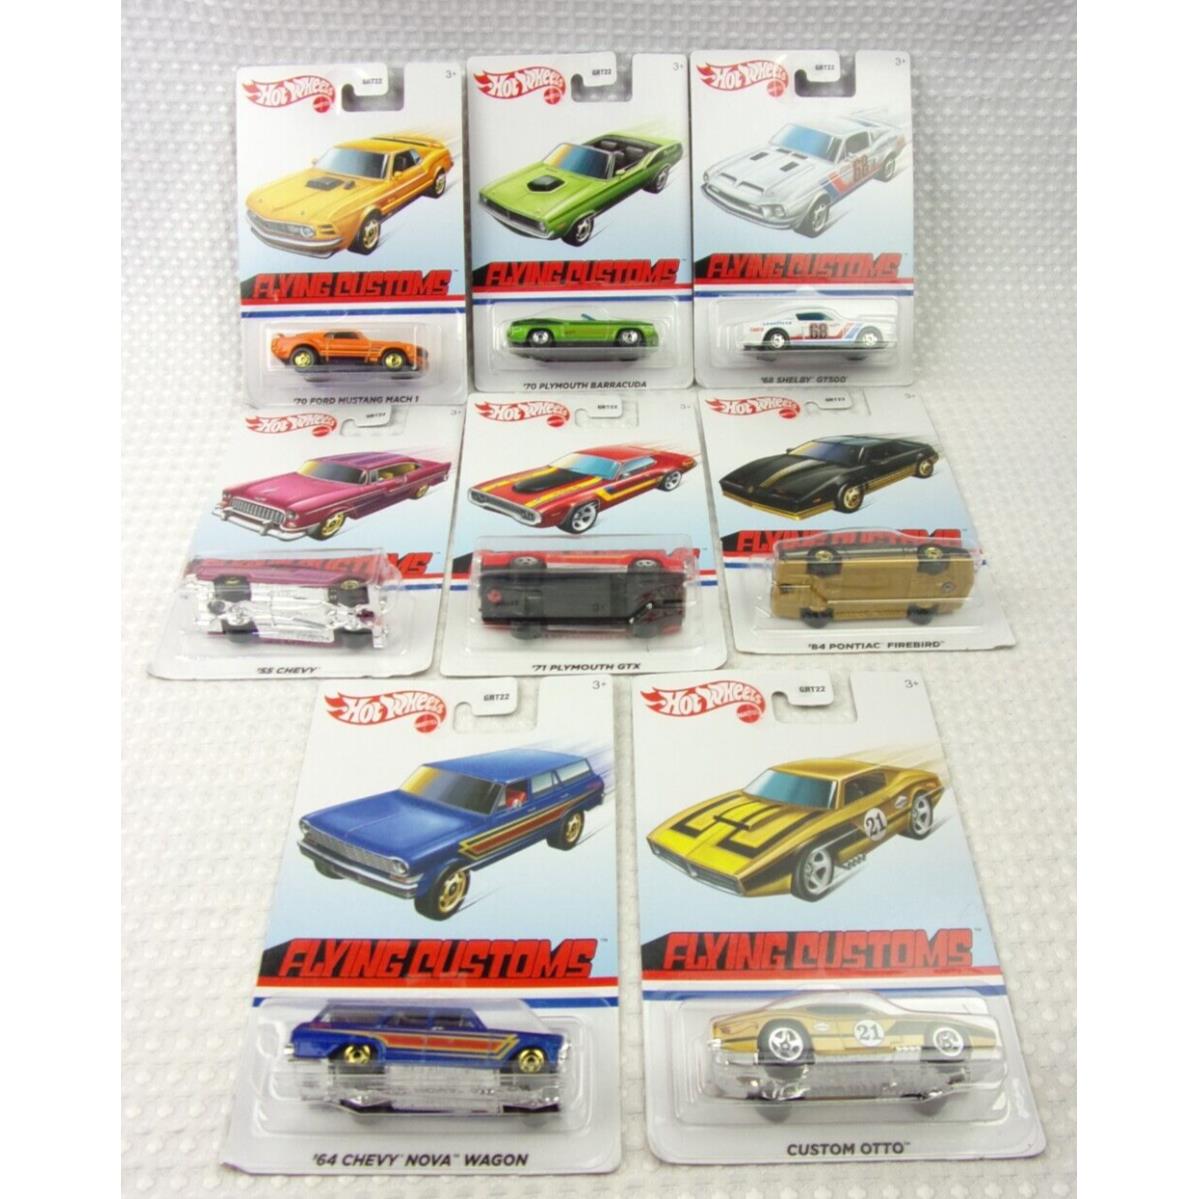 2021 Hot Wheels Mix 2 Target Exclusive Flying Customs Set of 8 Cars